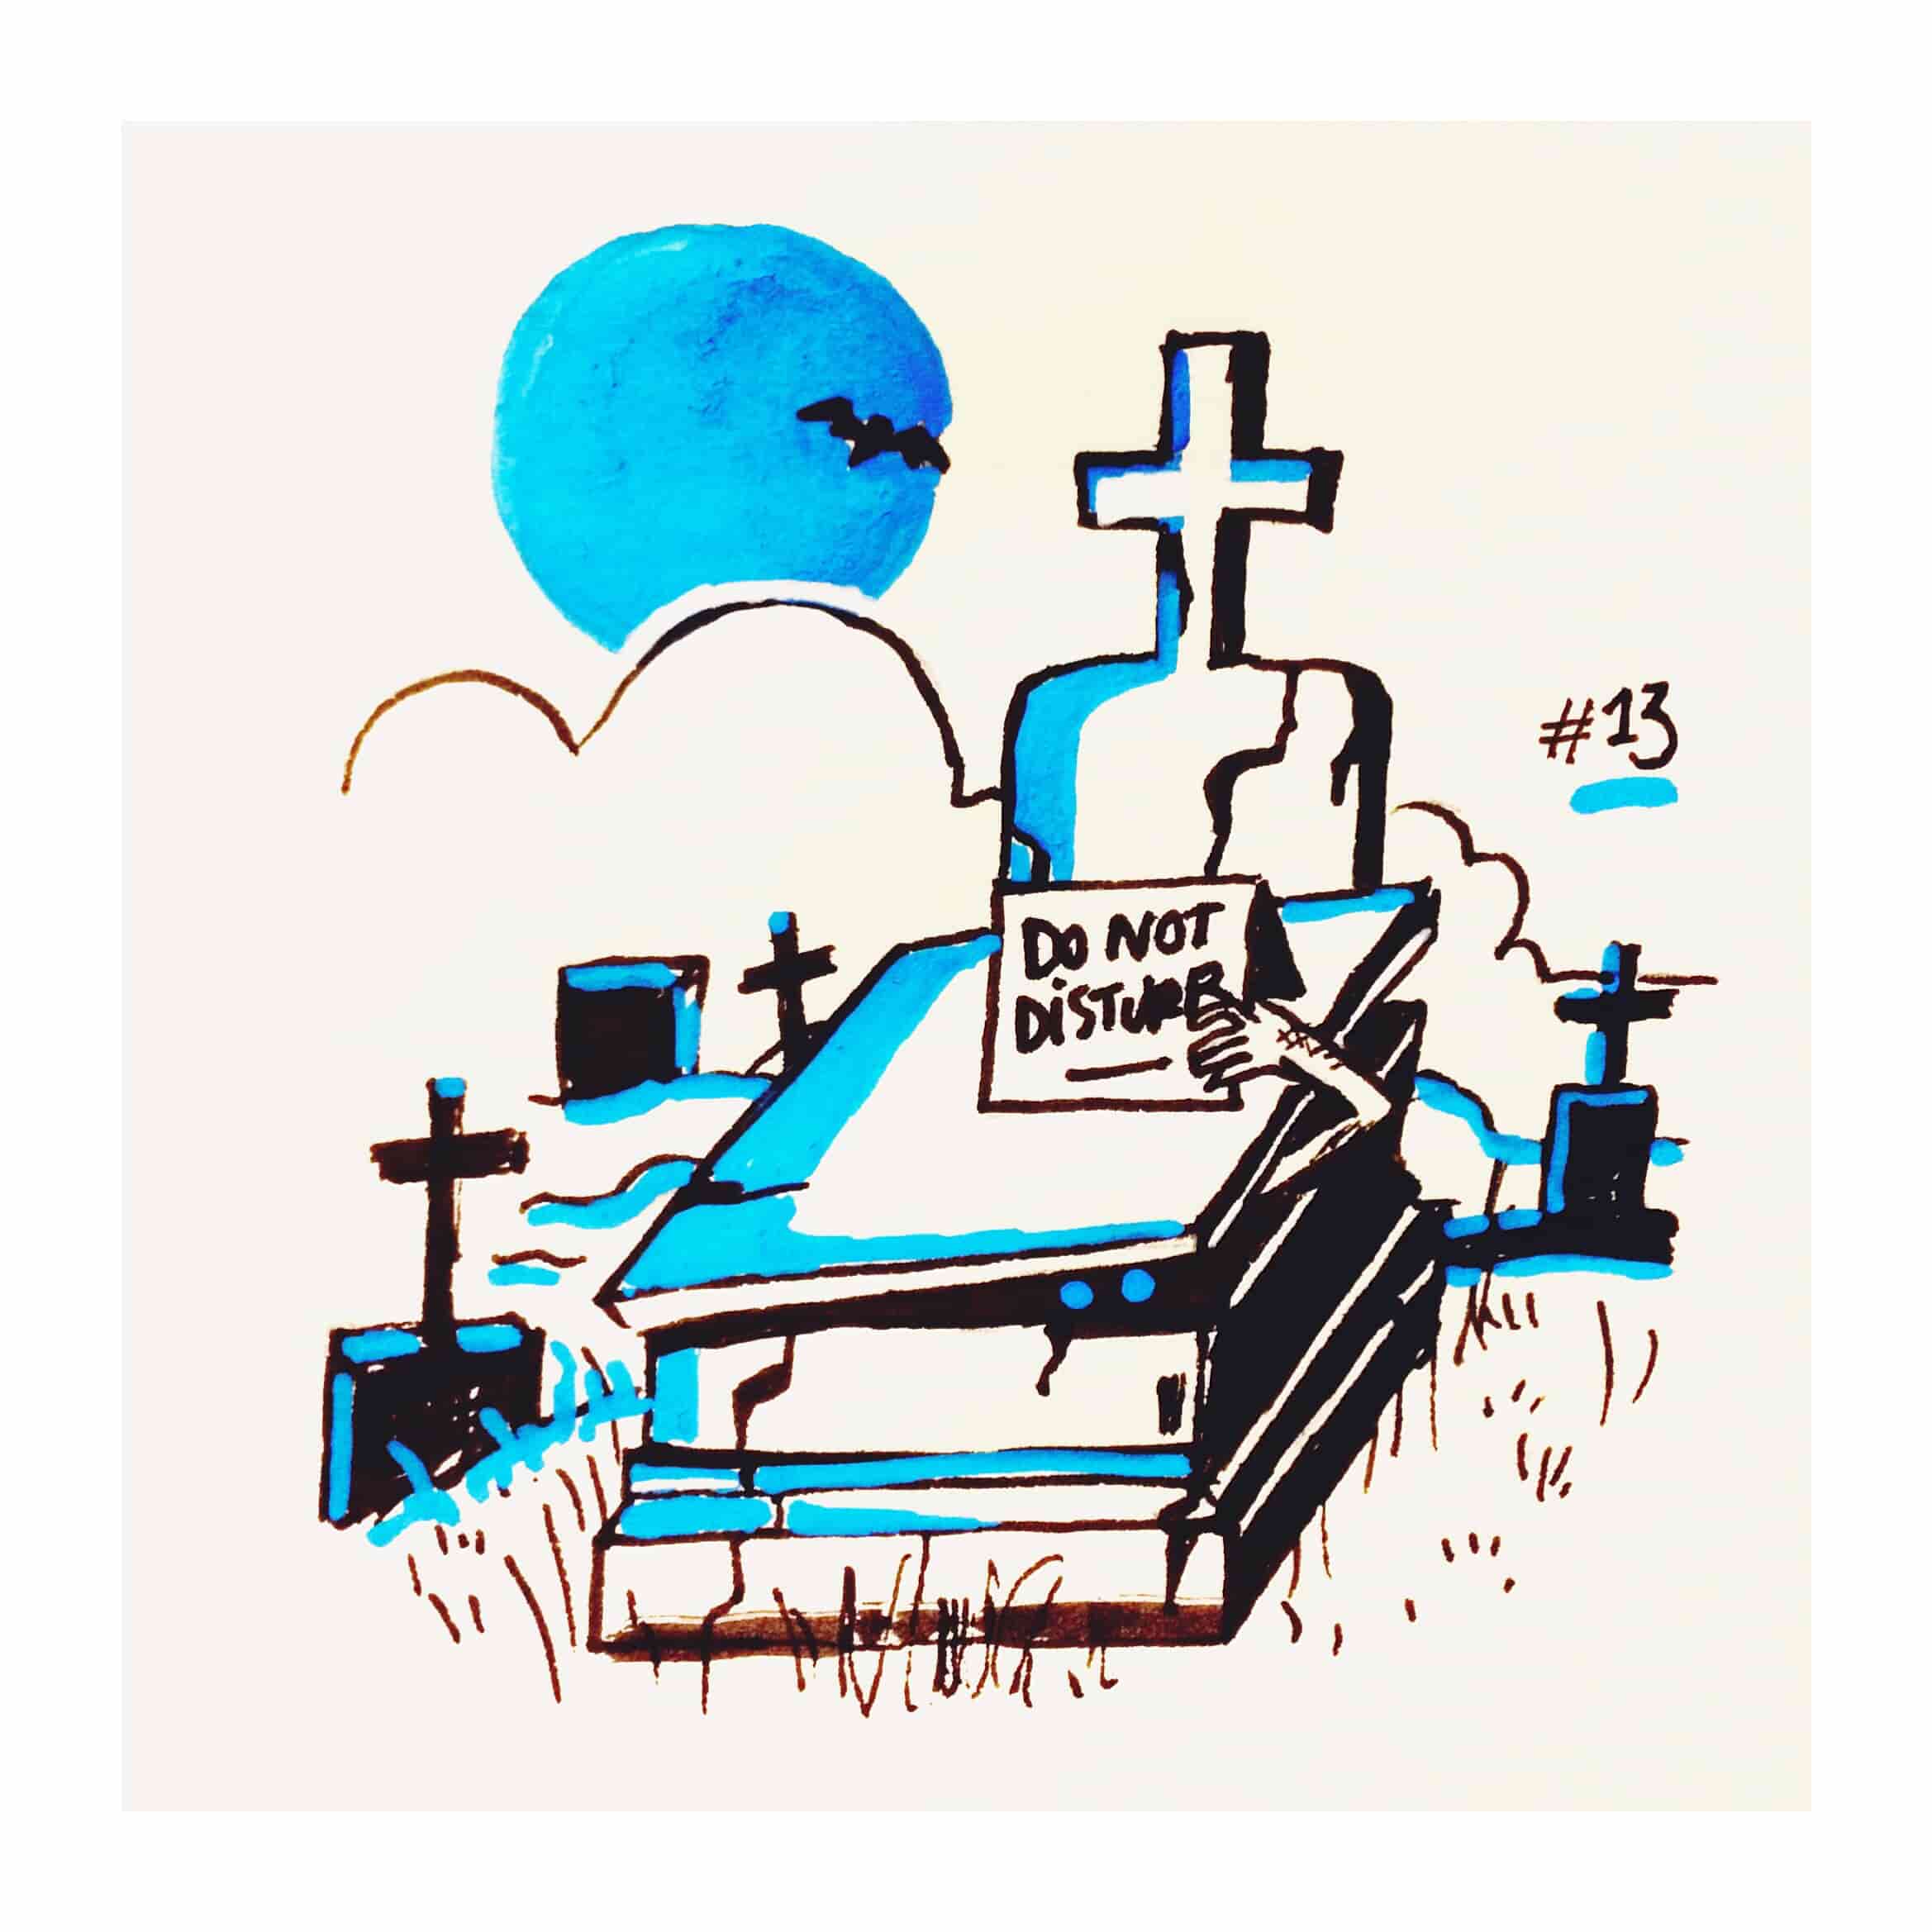 Guarded x Grave